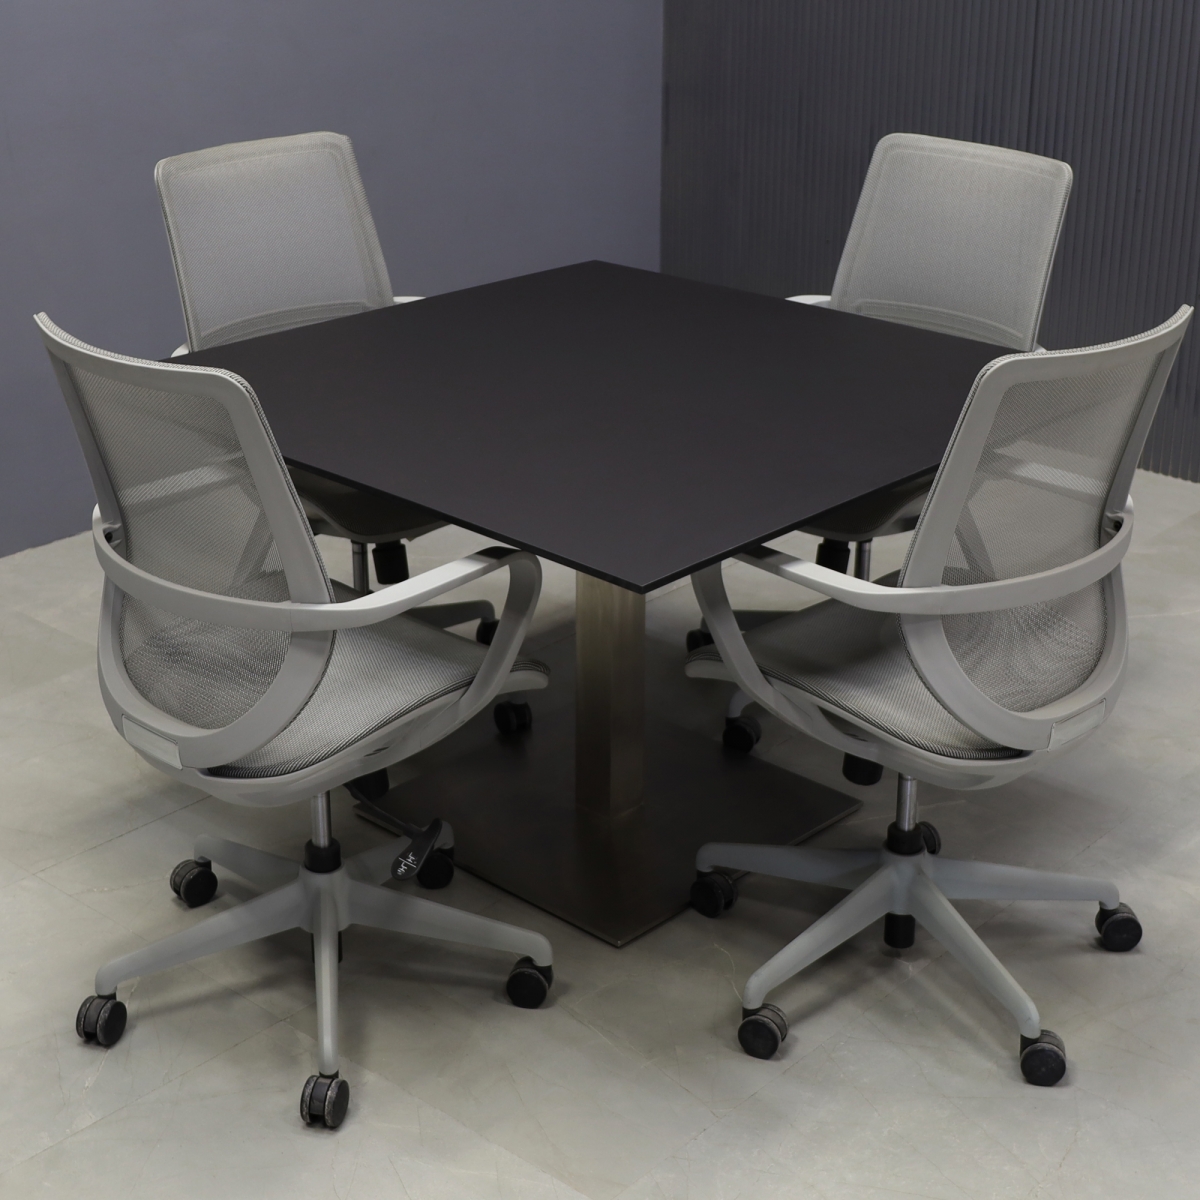 California Square Conference Table with Engineered Stone Top